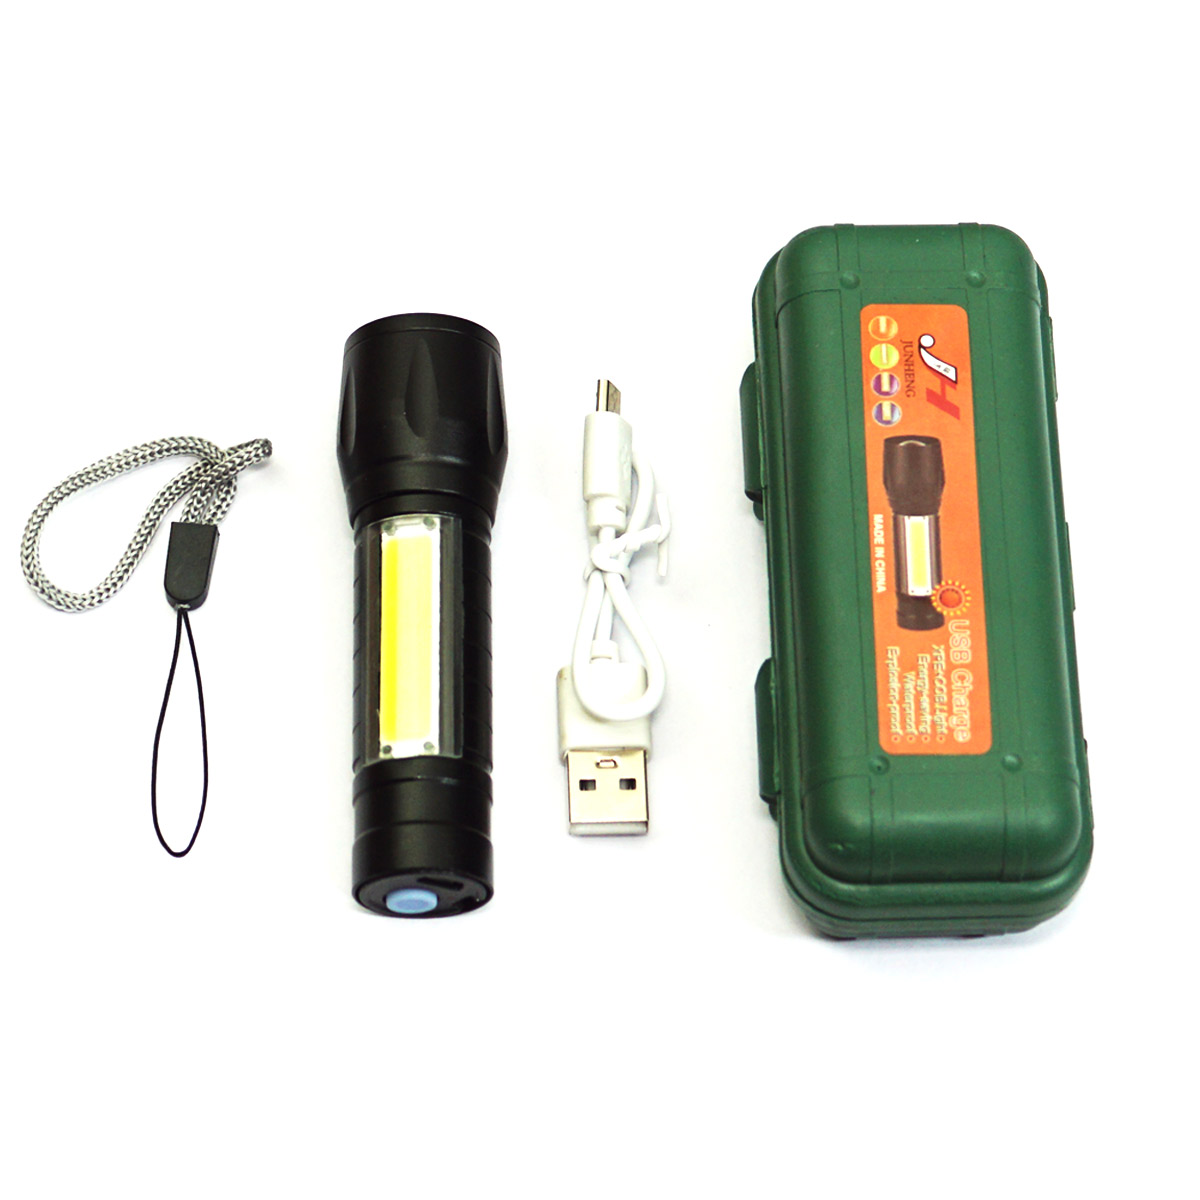 penhouse.in Mini Handy XPE-COB Zoom Light Torch With USB Rechargeble Battery SKU 50092